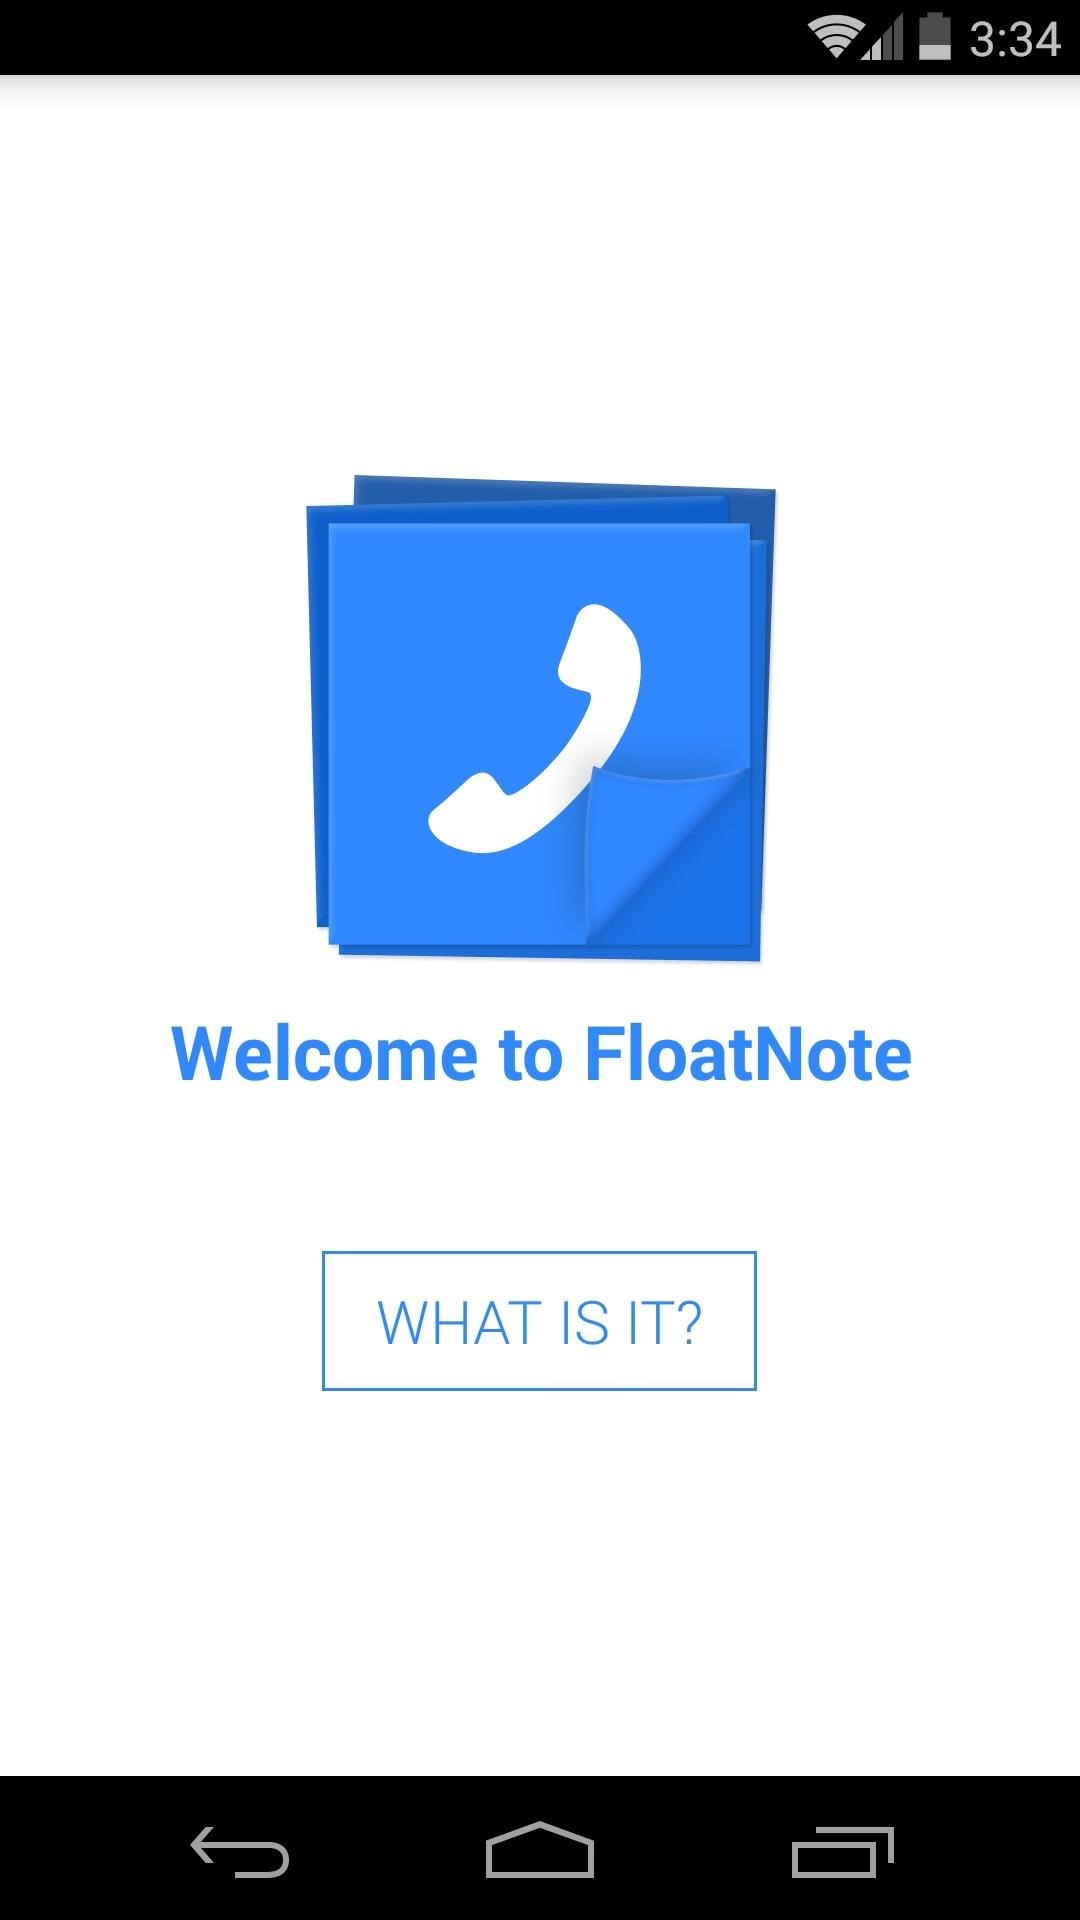 FloatNote Gives You Contact-Specific Popups That Remind You What to Talk About During Calls